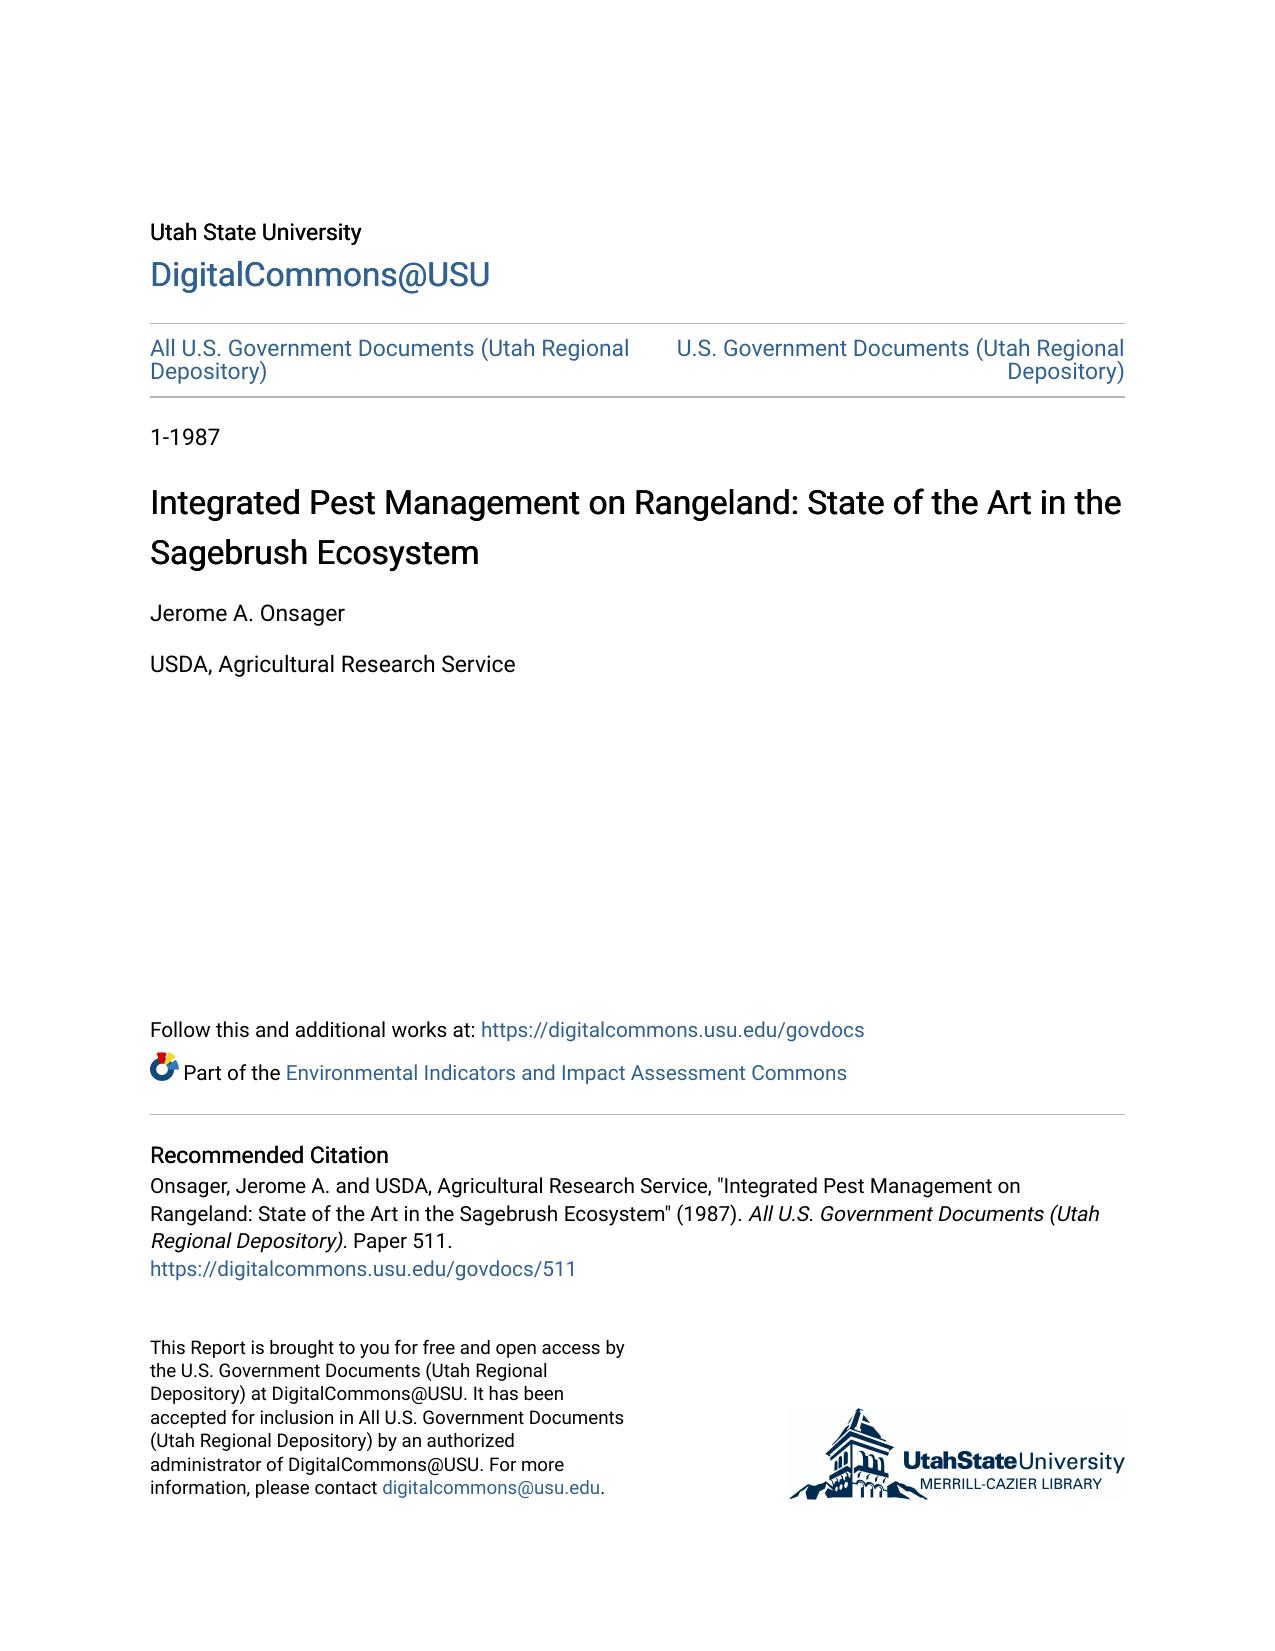 Integrated Pest Management on Rangeland: State of the Art in the Sagebrush Ecosystem